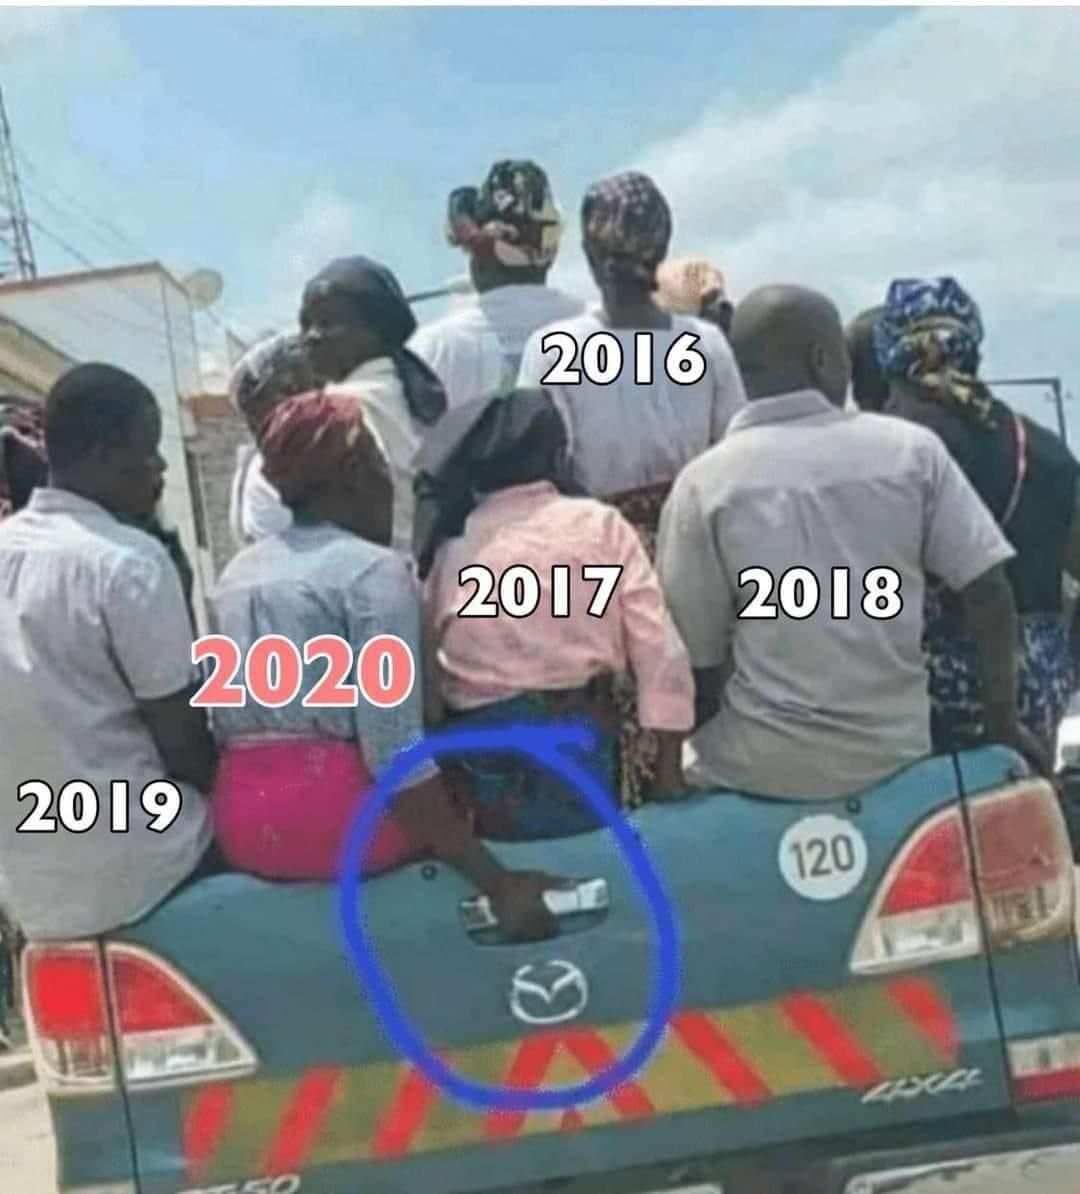 Year 2020 vs others...